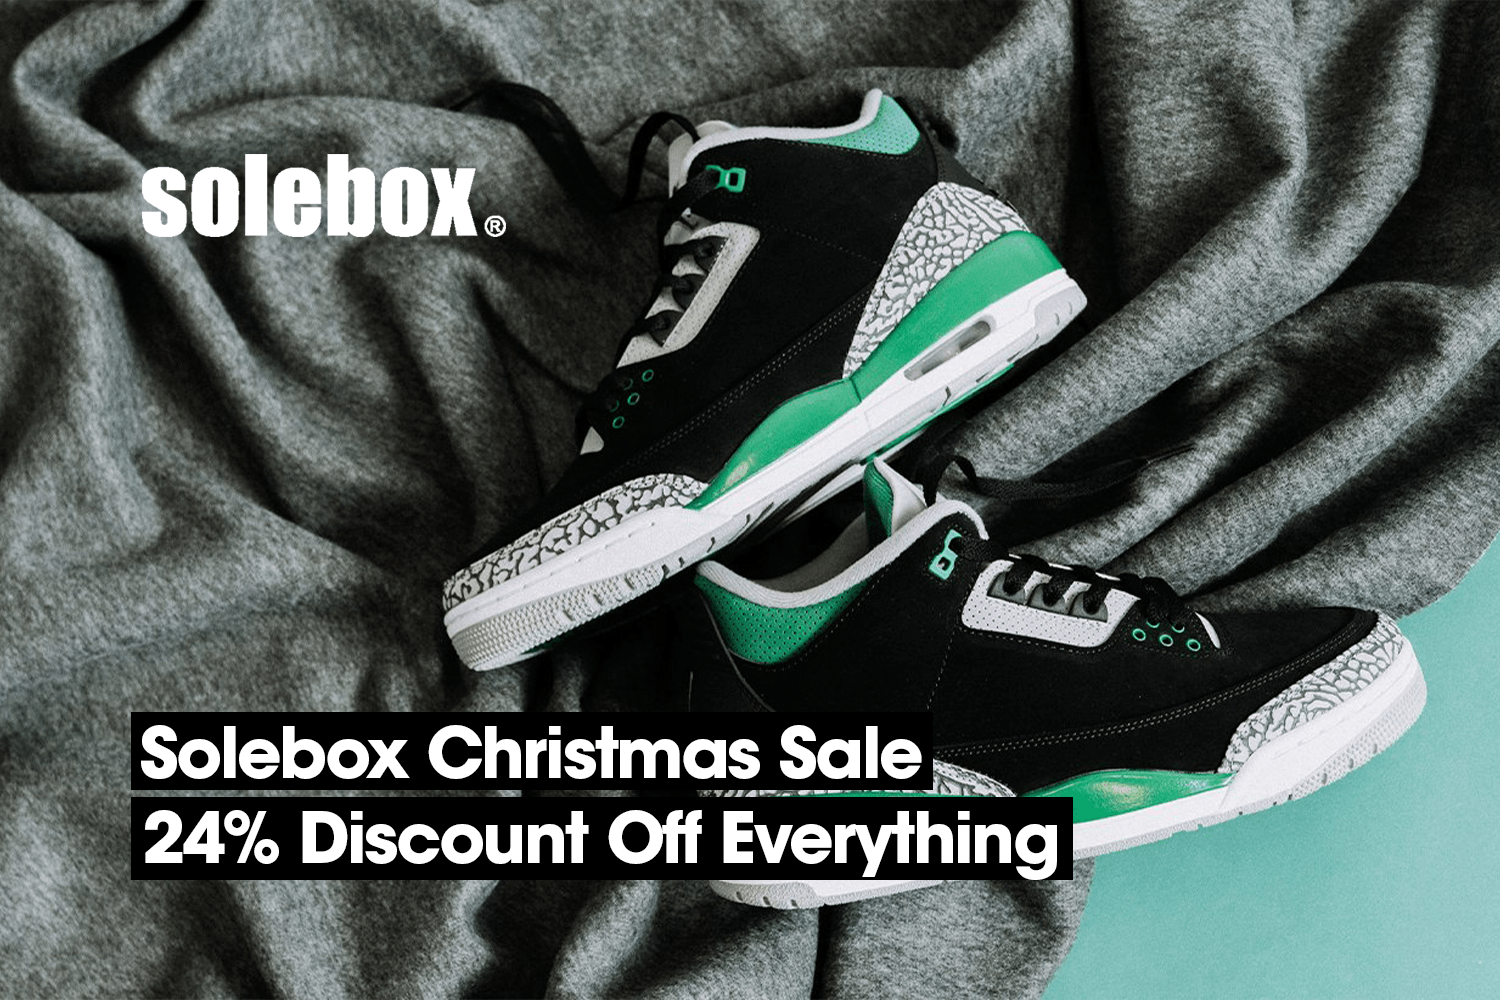 Our favourite items from the Solebox Christmas Sale